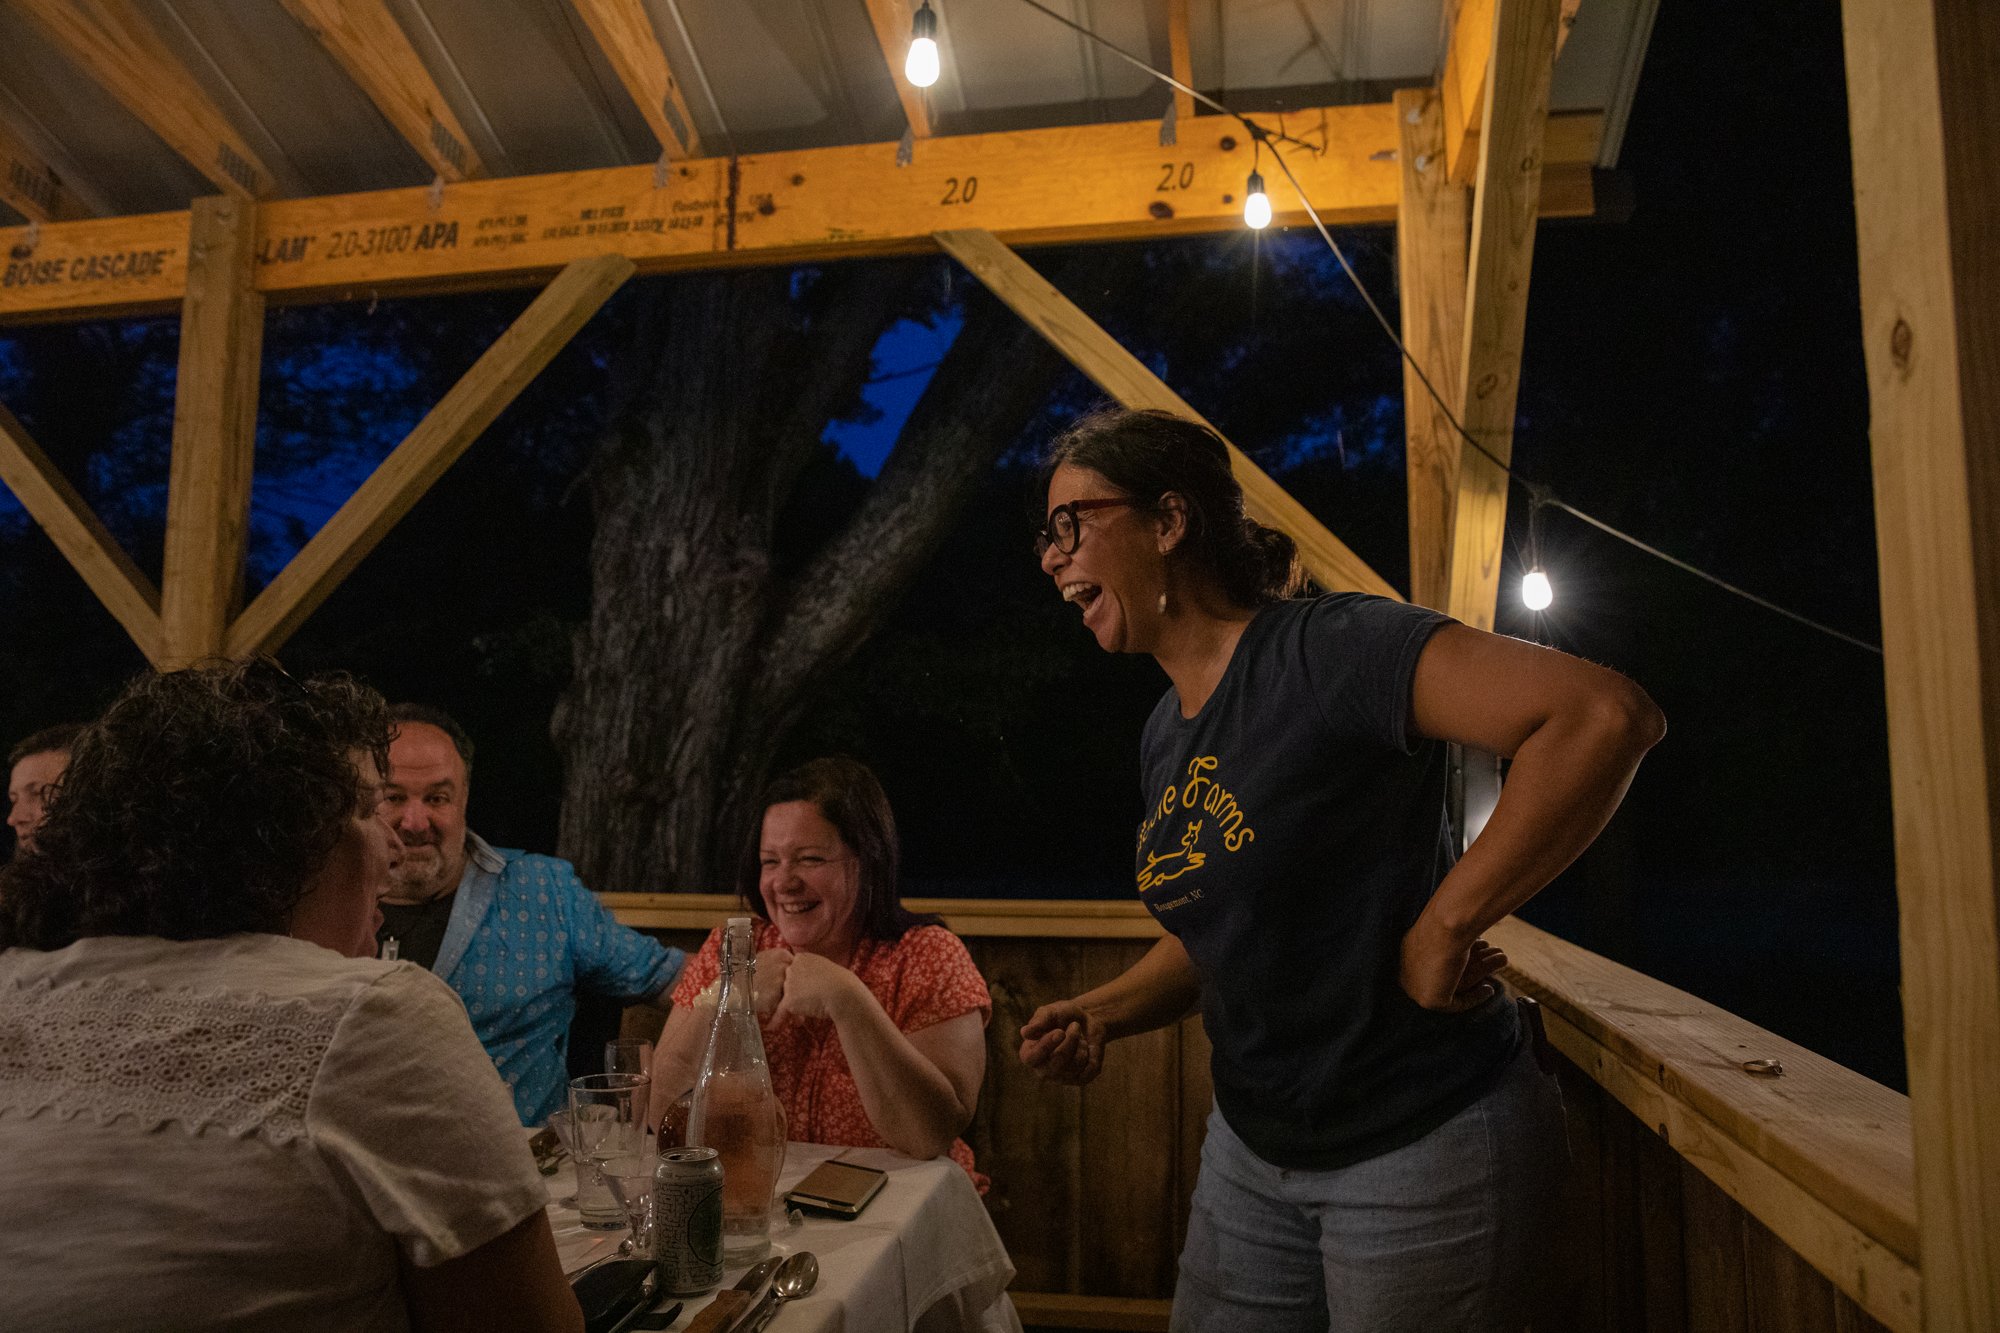  “Every second Saturday, we host a Farm Dinner. People come with their friends and eat our food. Ted cooks and we have volunteers who help set up. Everyone sits communal style, so we all get to know each other.” Said Domville.  During the farm dinner